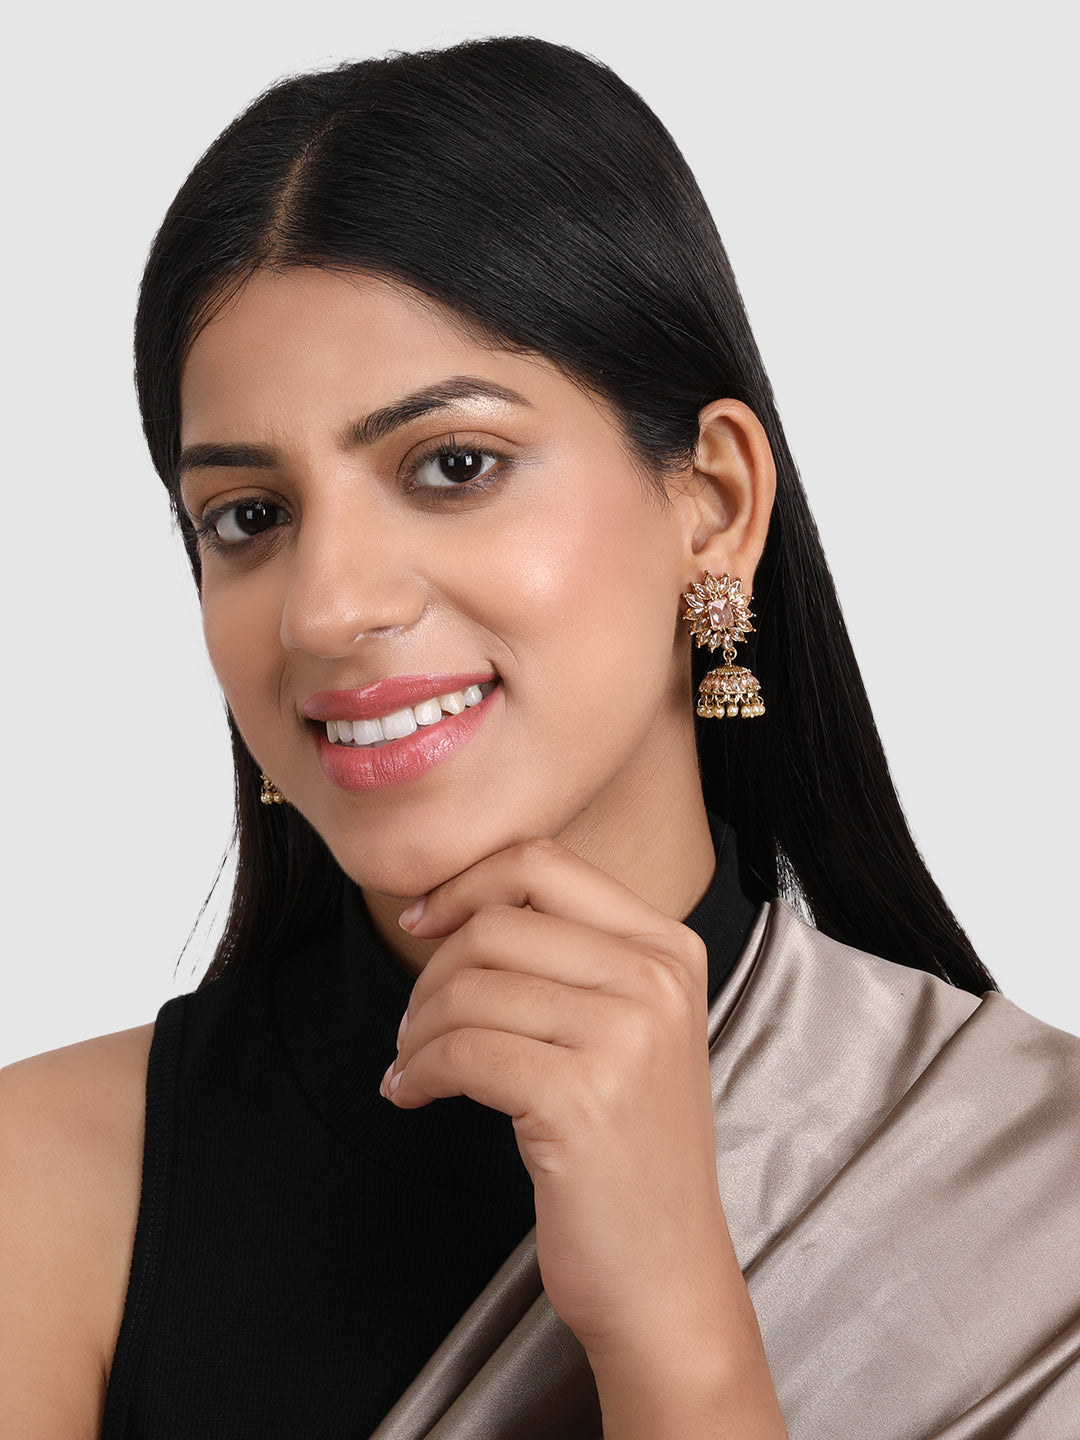 Gold-Plated Floral Artificial Stones Jhumkas Earrings